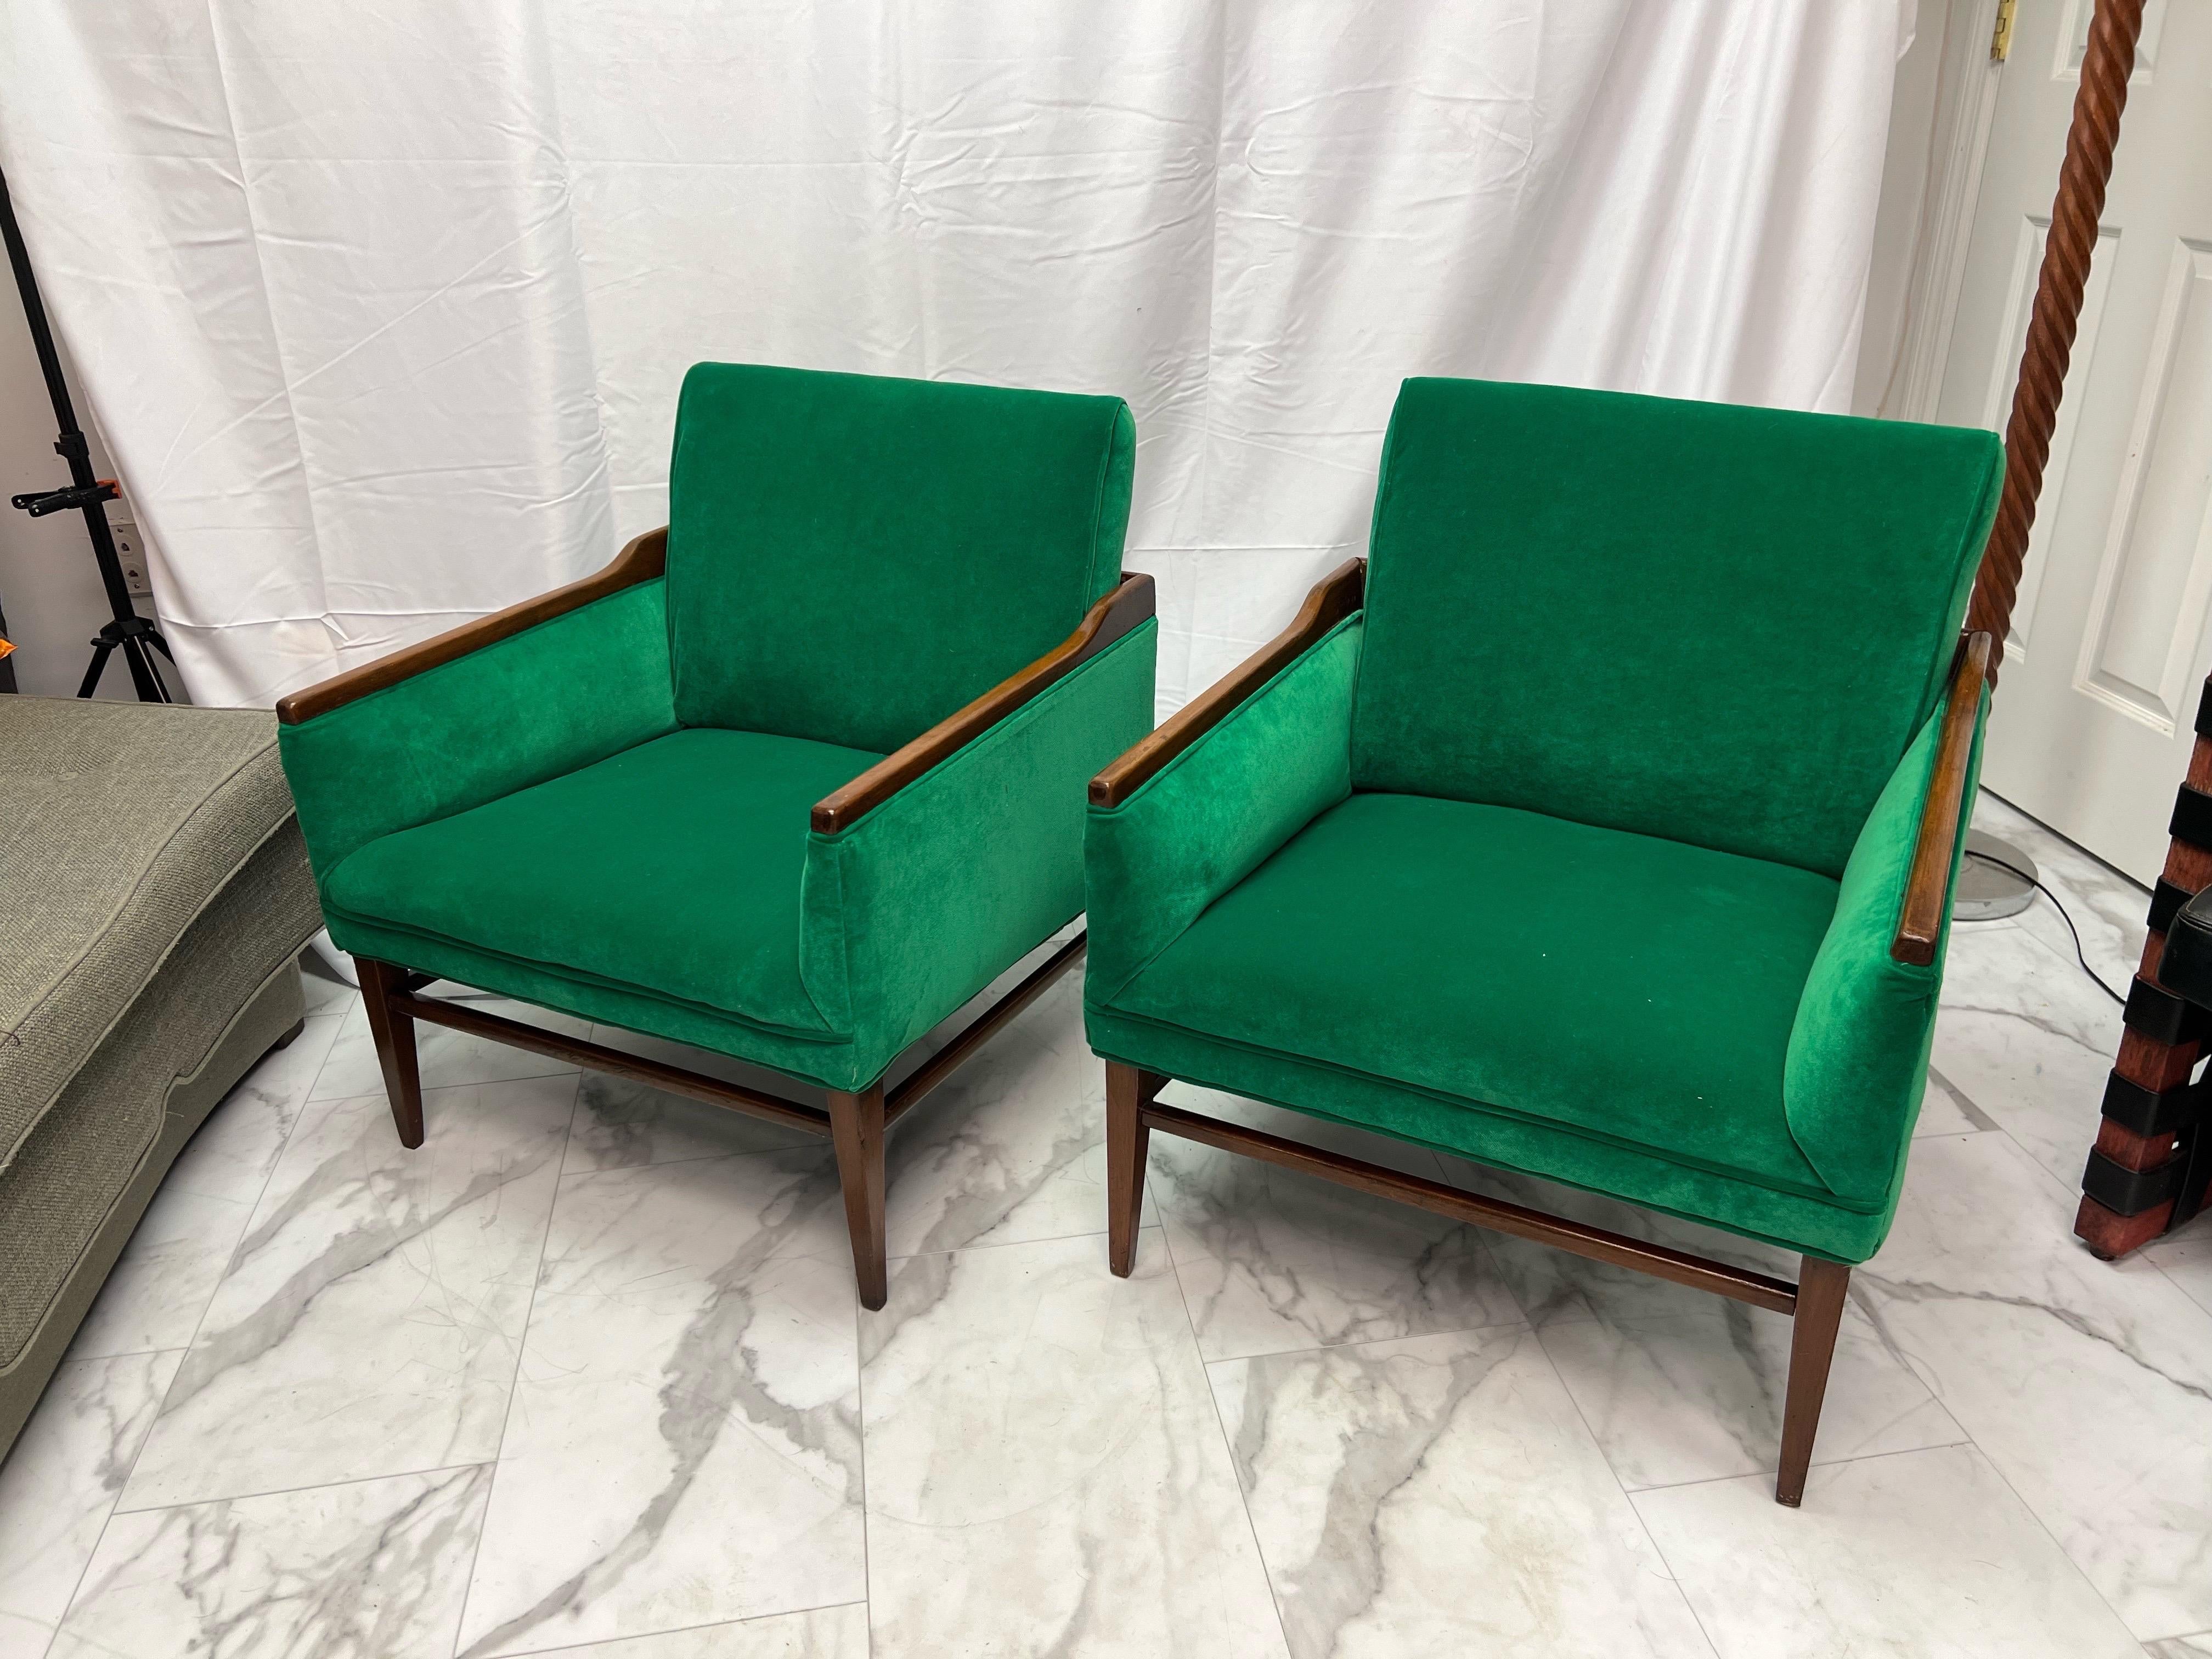 1950’s Walnut and Green Velvet Low Profile Chairs - a Pair For Sale 8